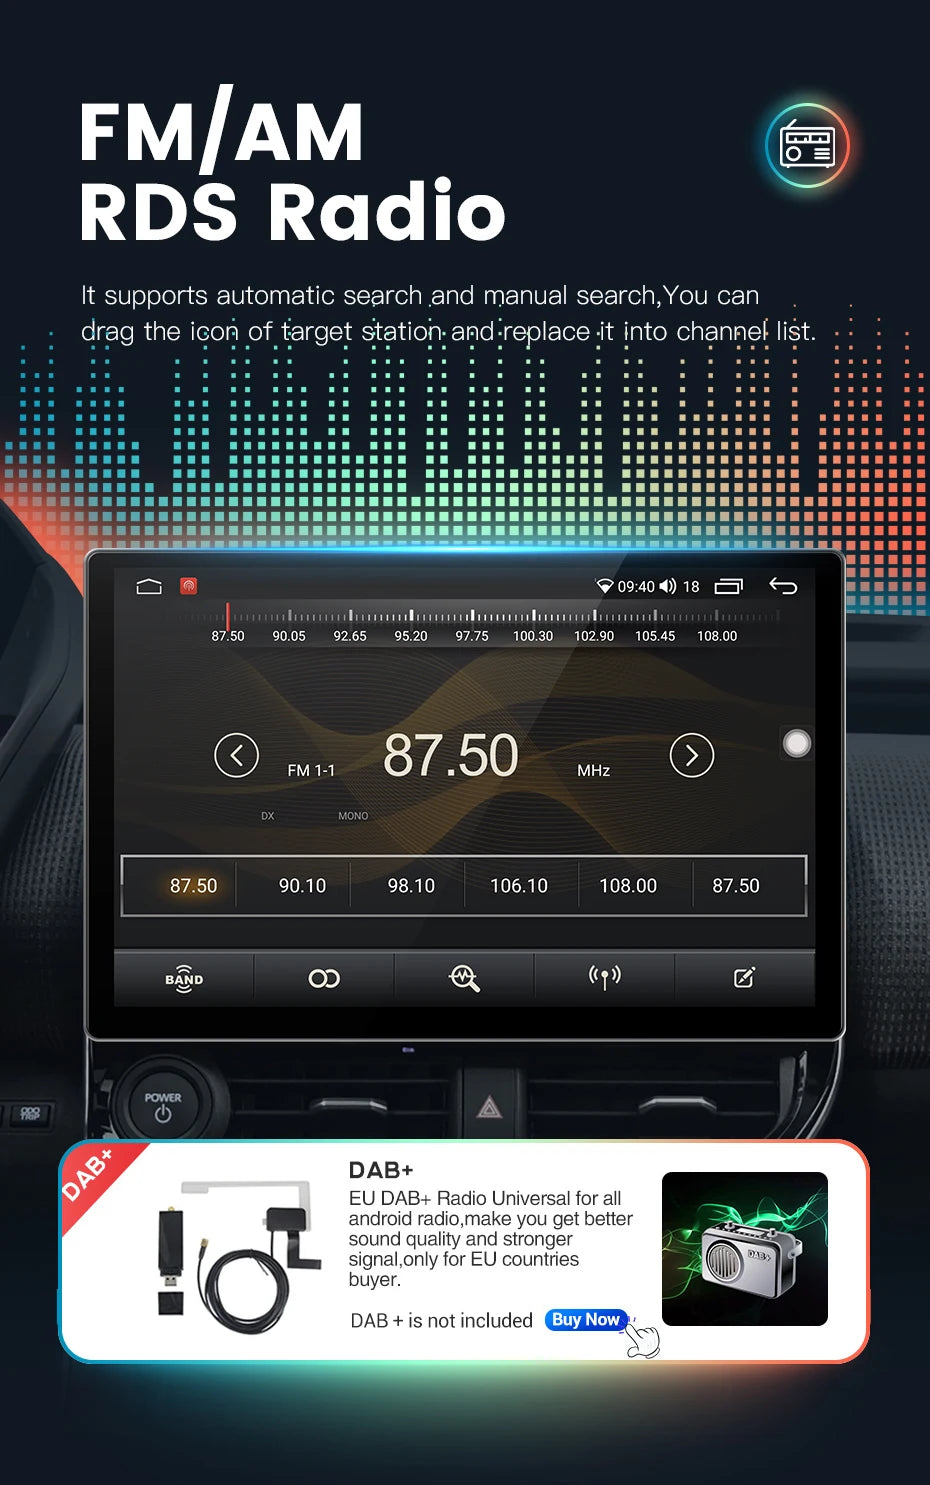 Tesla Model | 13.3inch | For Any Cars | Android 13 | Car Stereo | Head Unit - Pluscenter